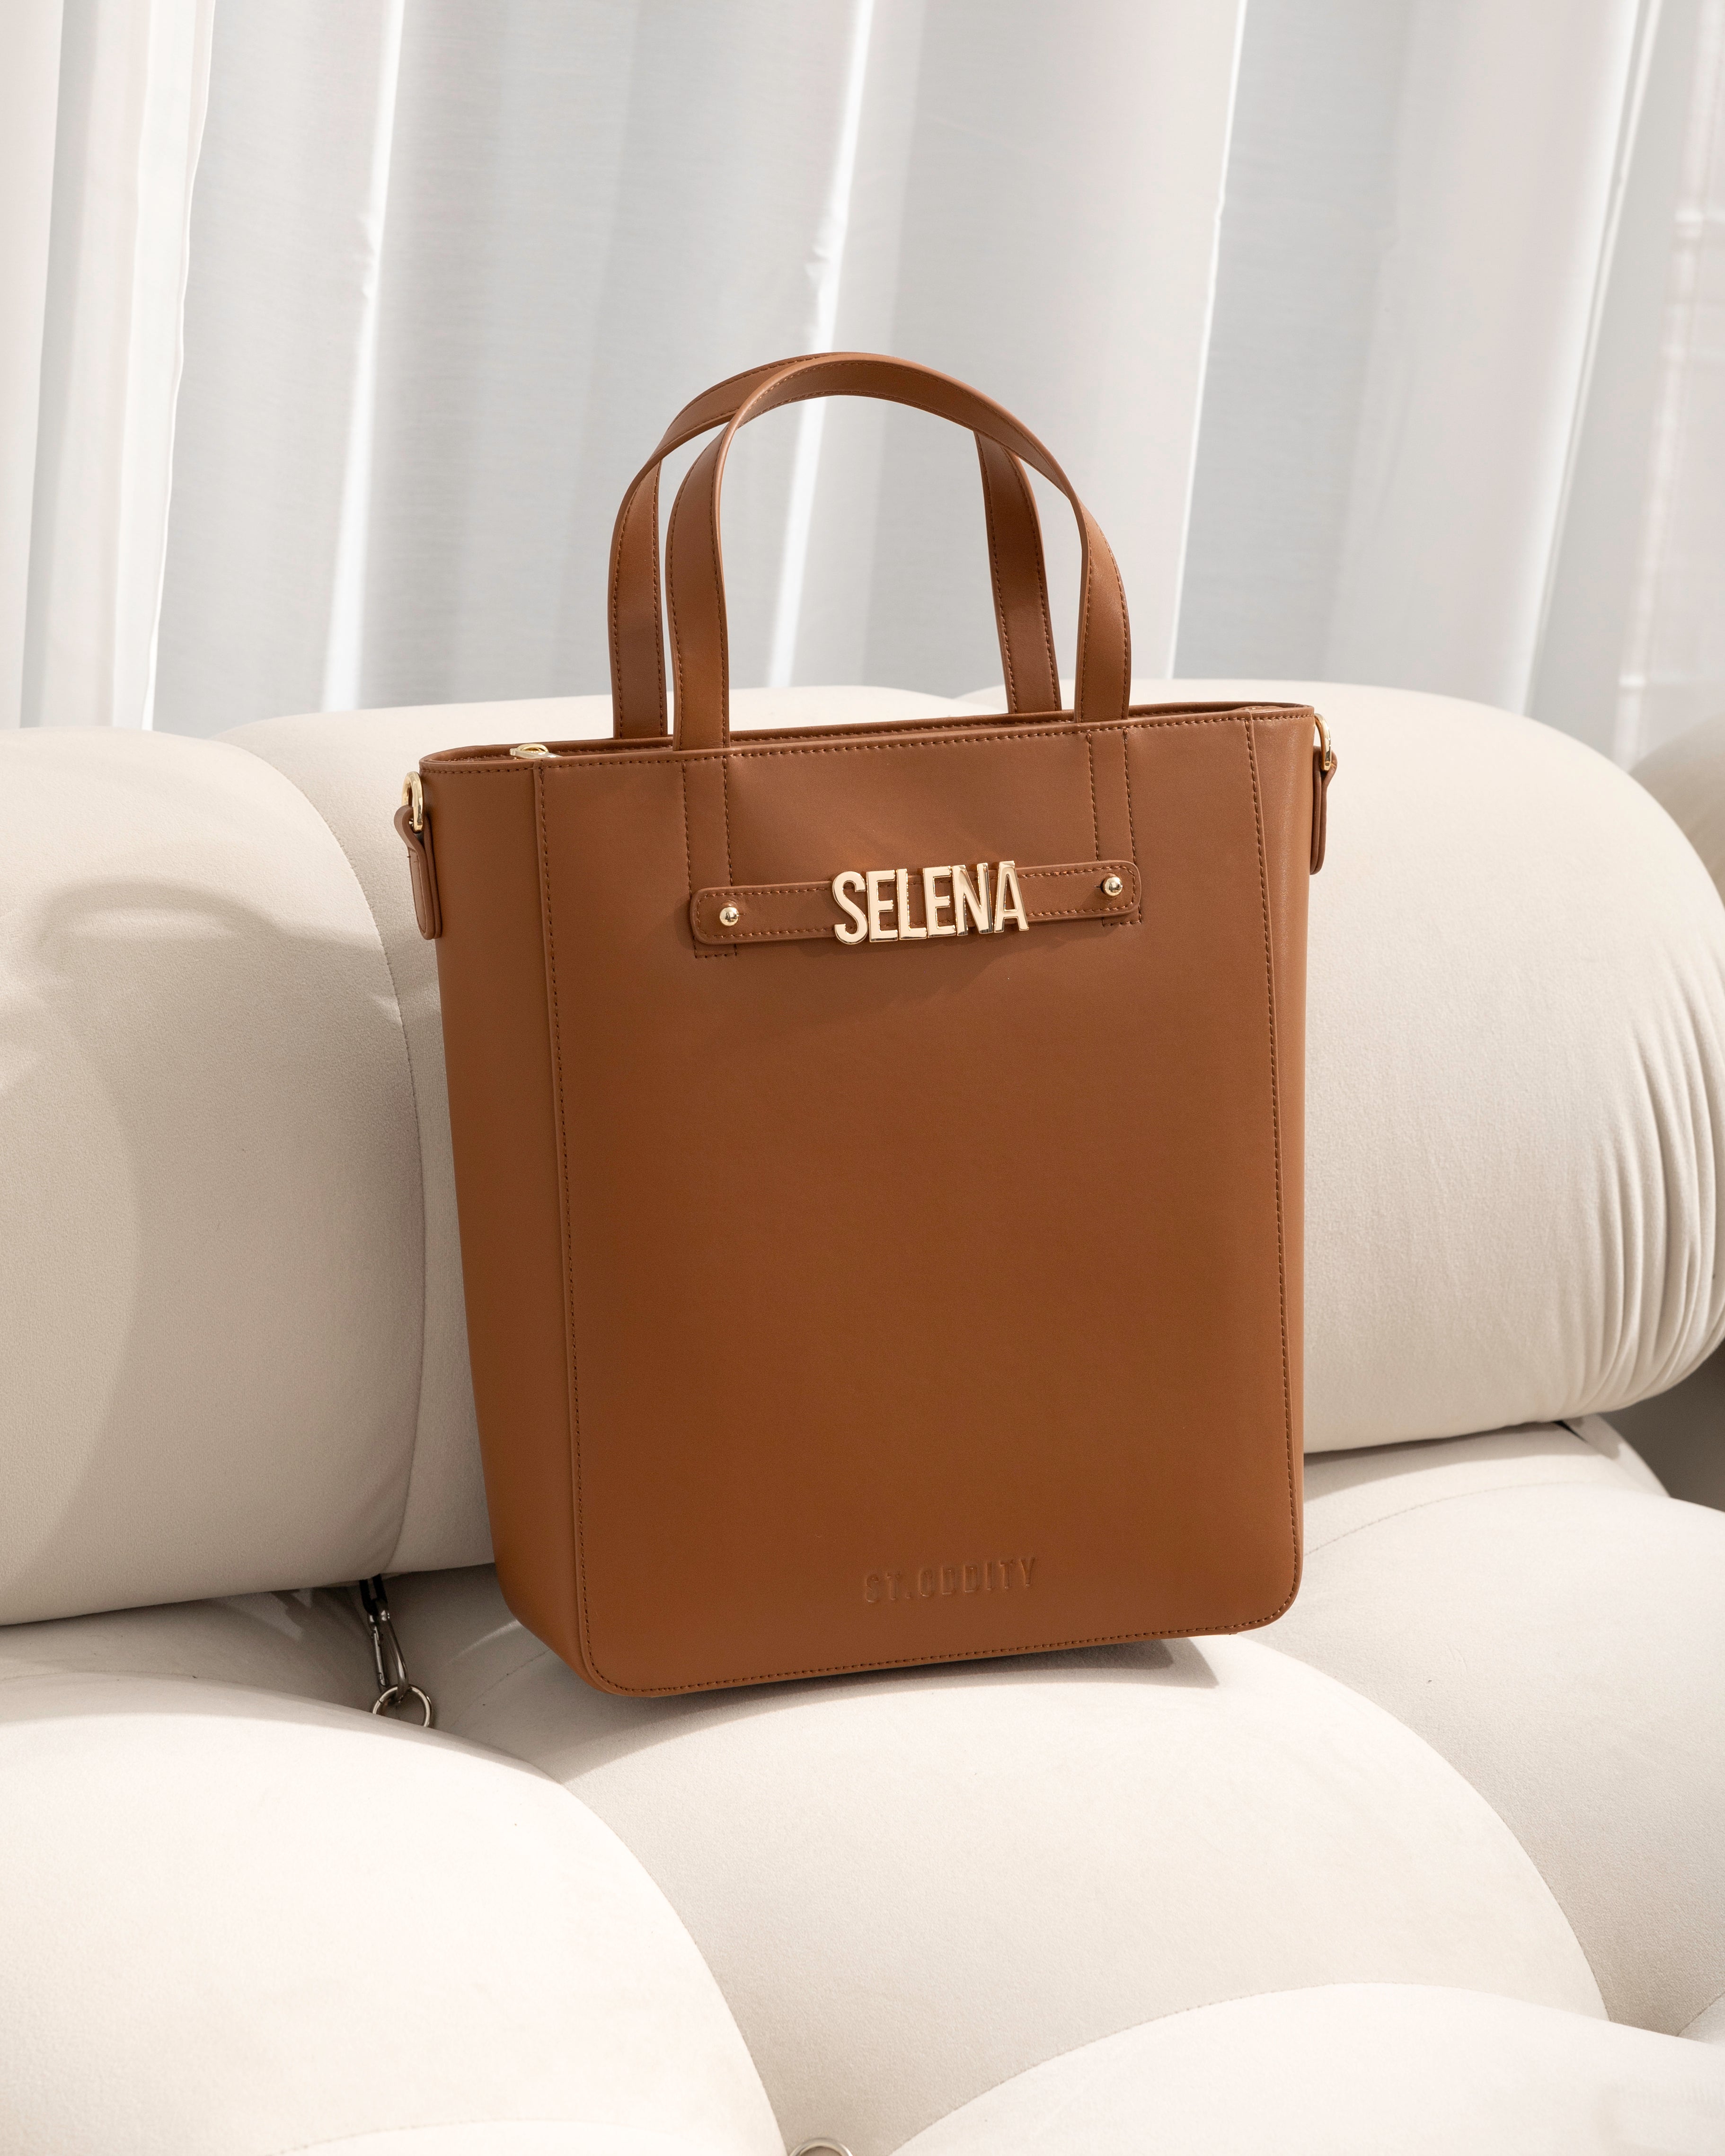 Tote in Tan with Personalised Hardware